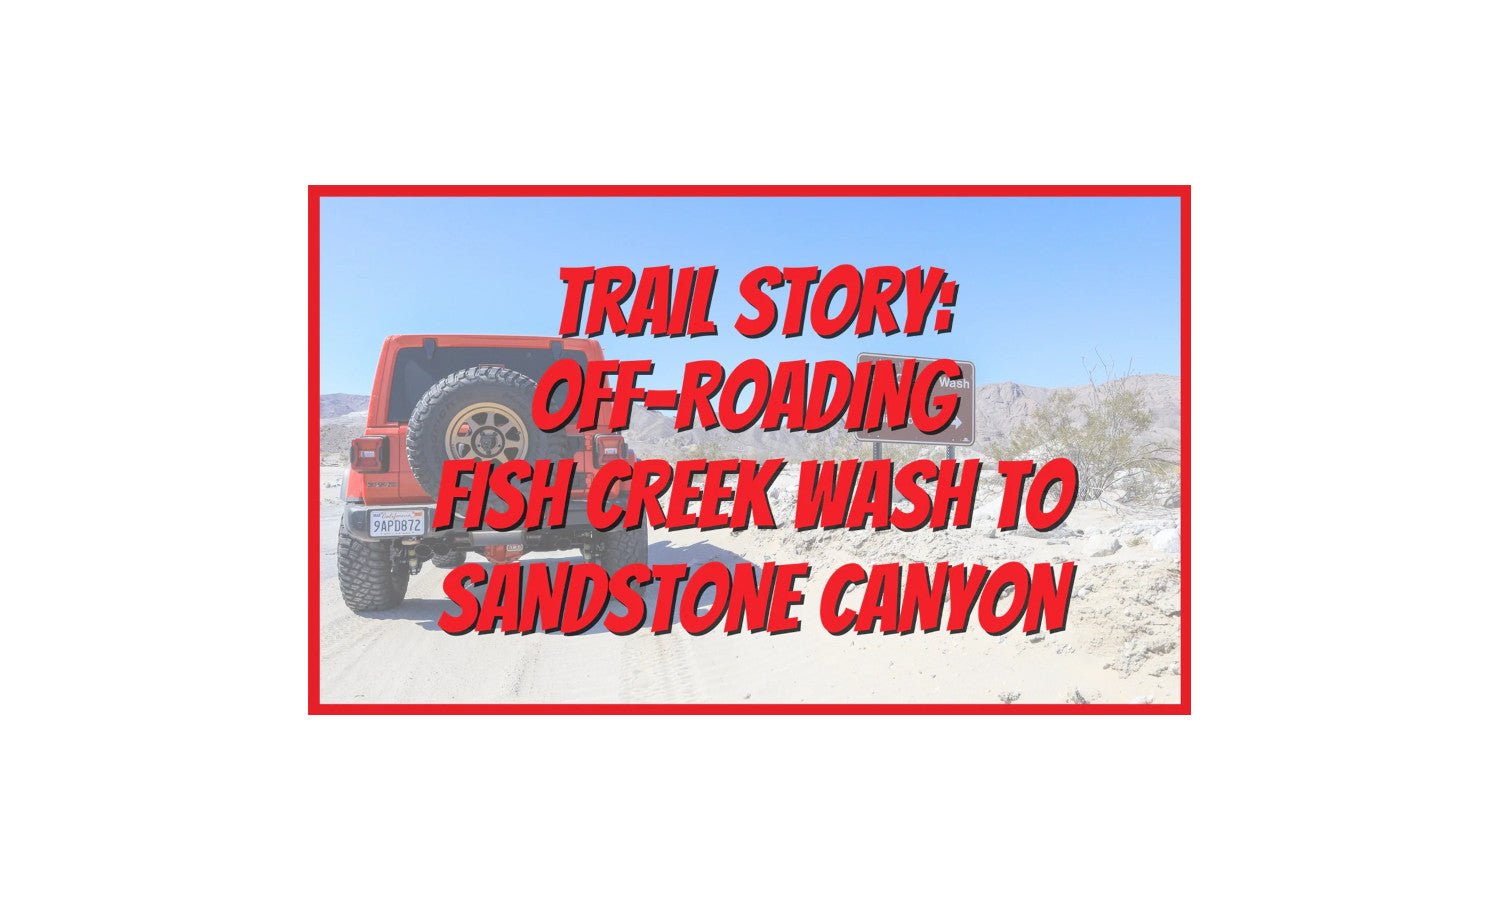 Off-Roading Fish Creek Wash to Sandstone Canyon